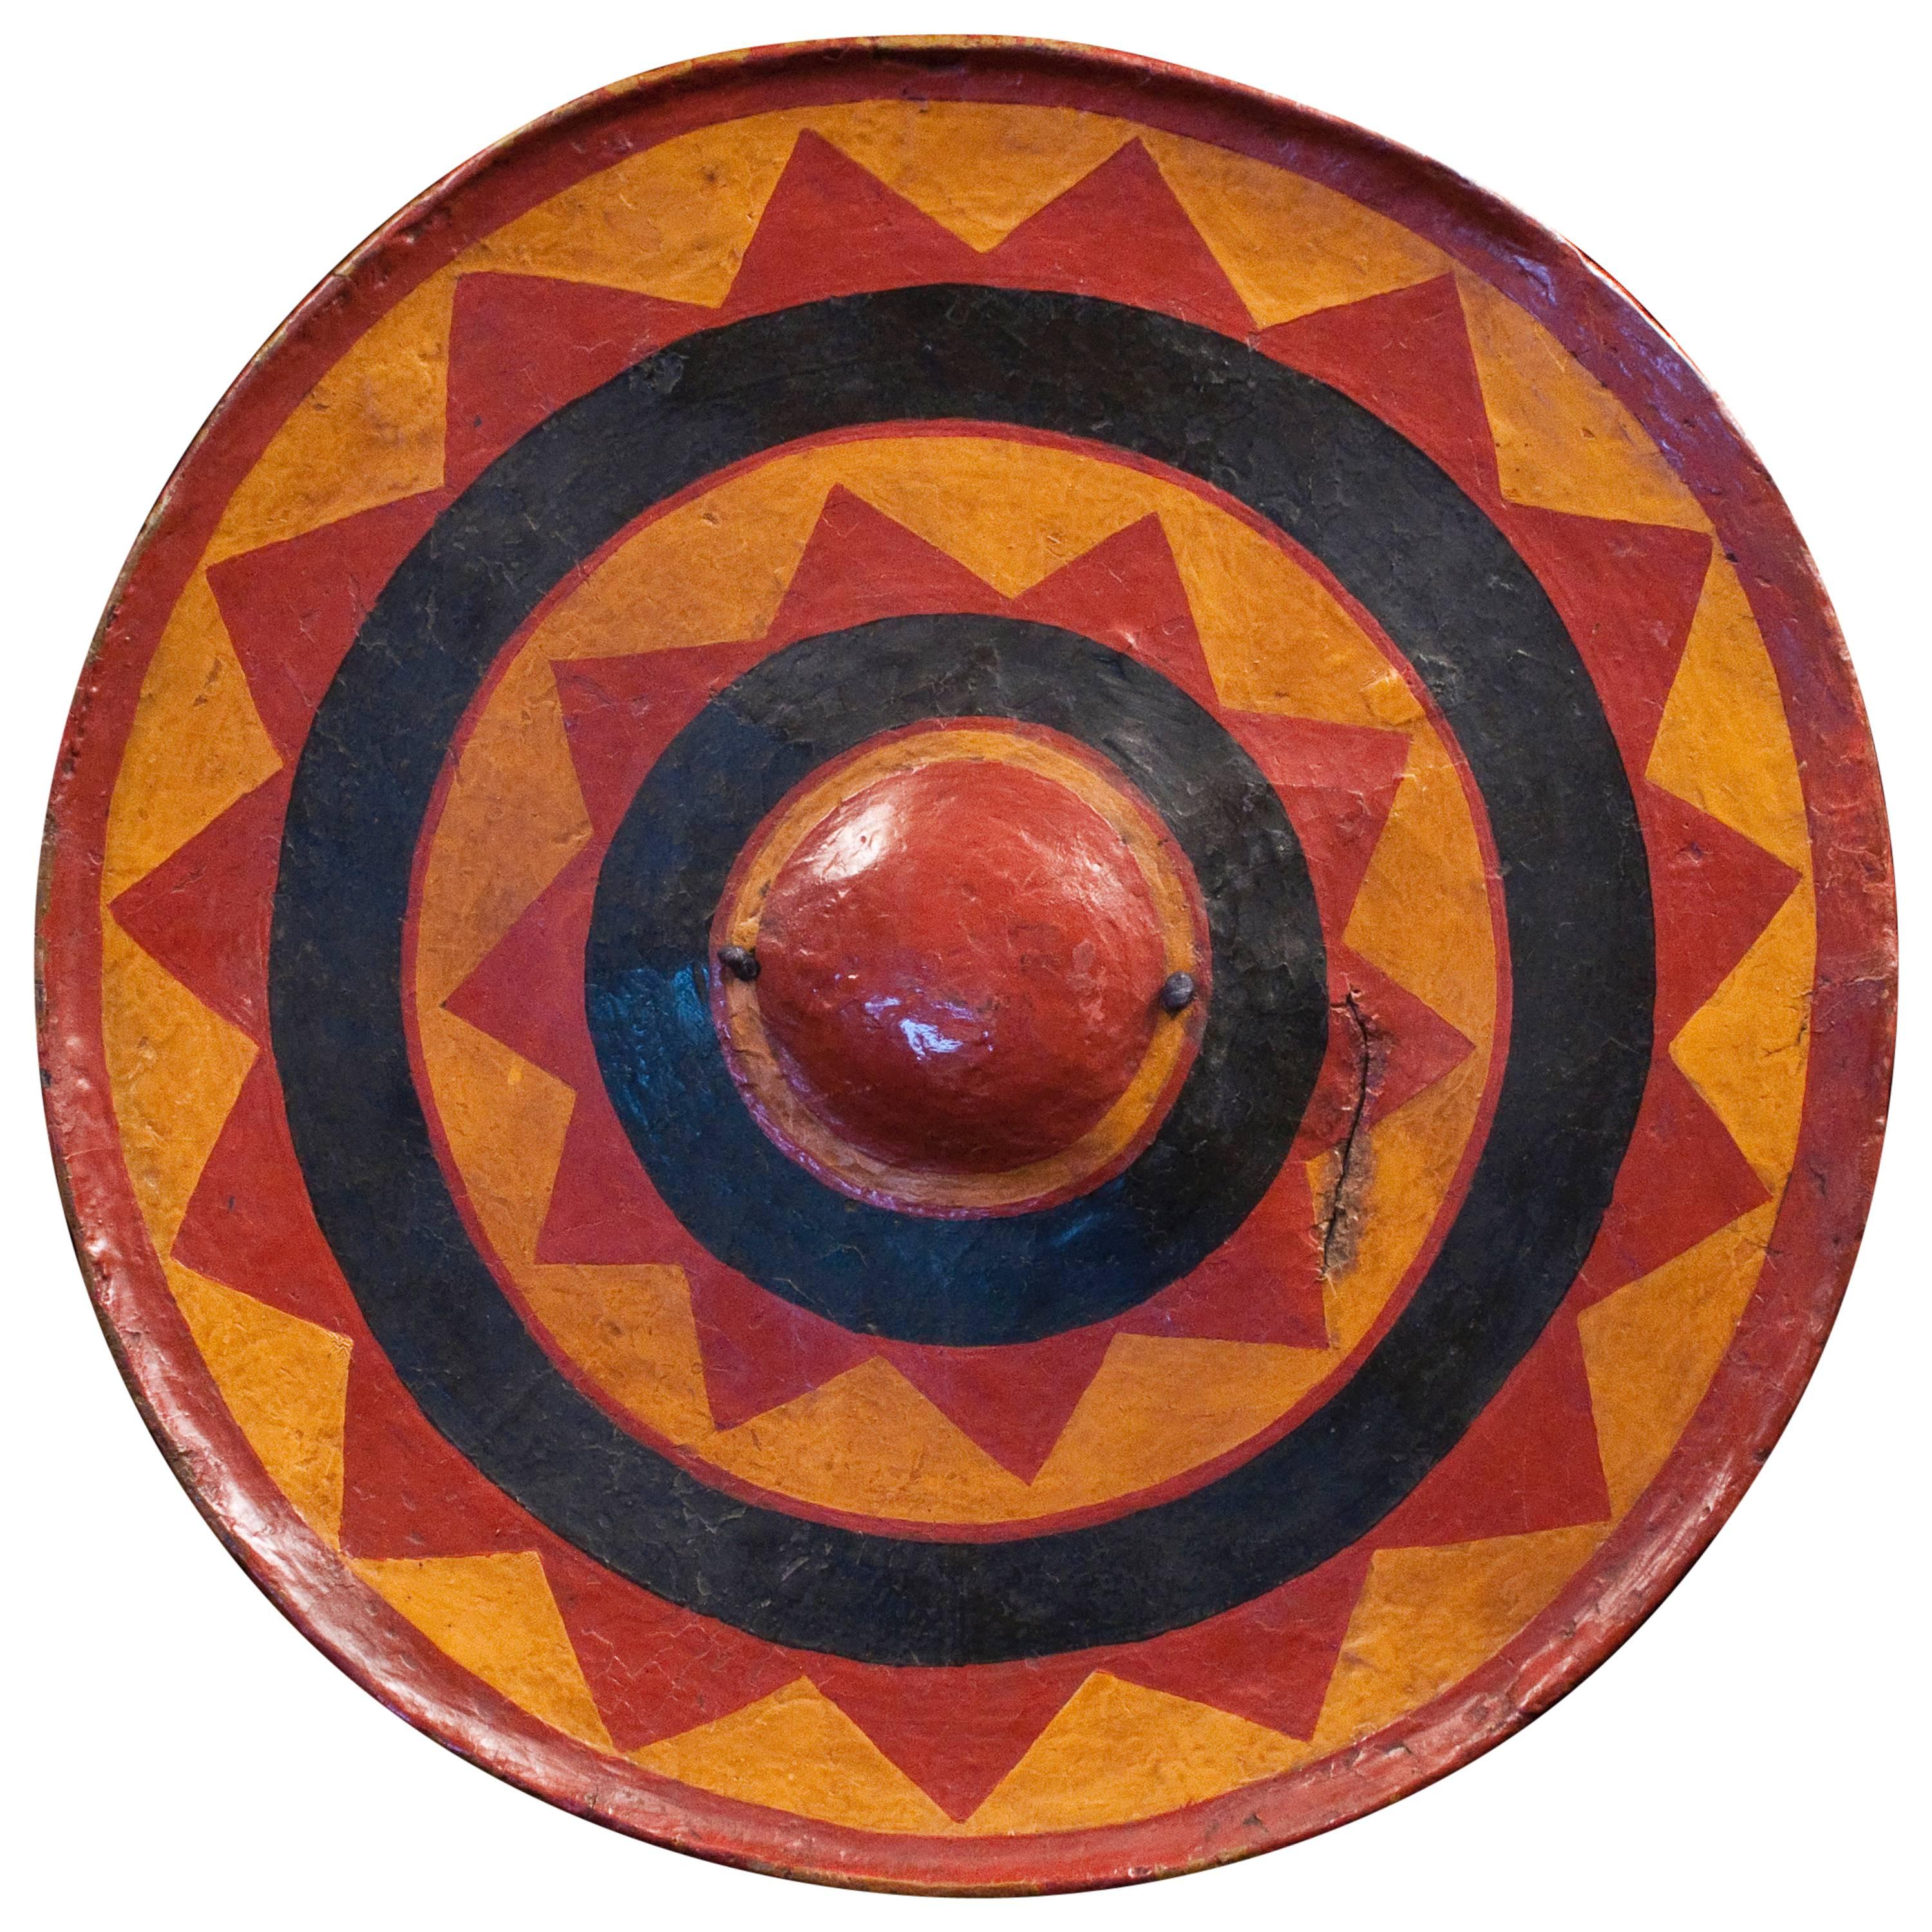 Early 20th Century Painted Hide Shield from Southwestern China